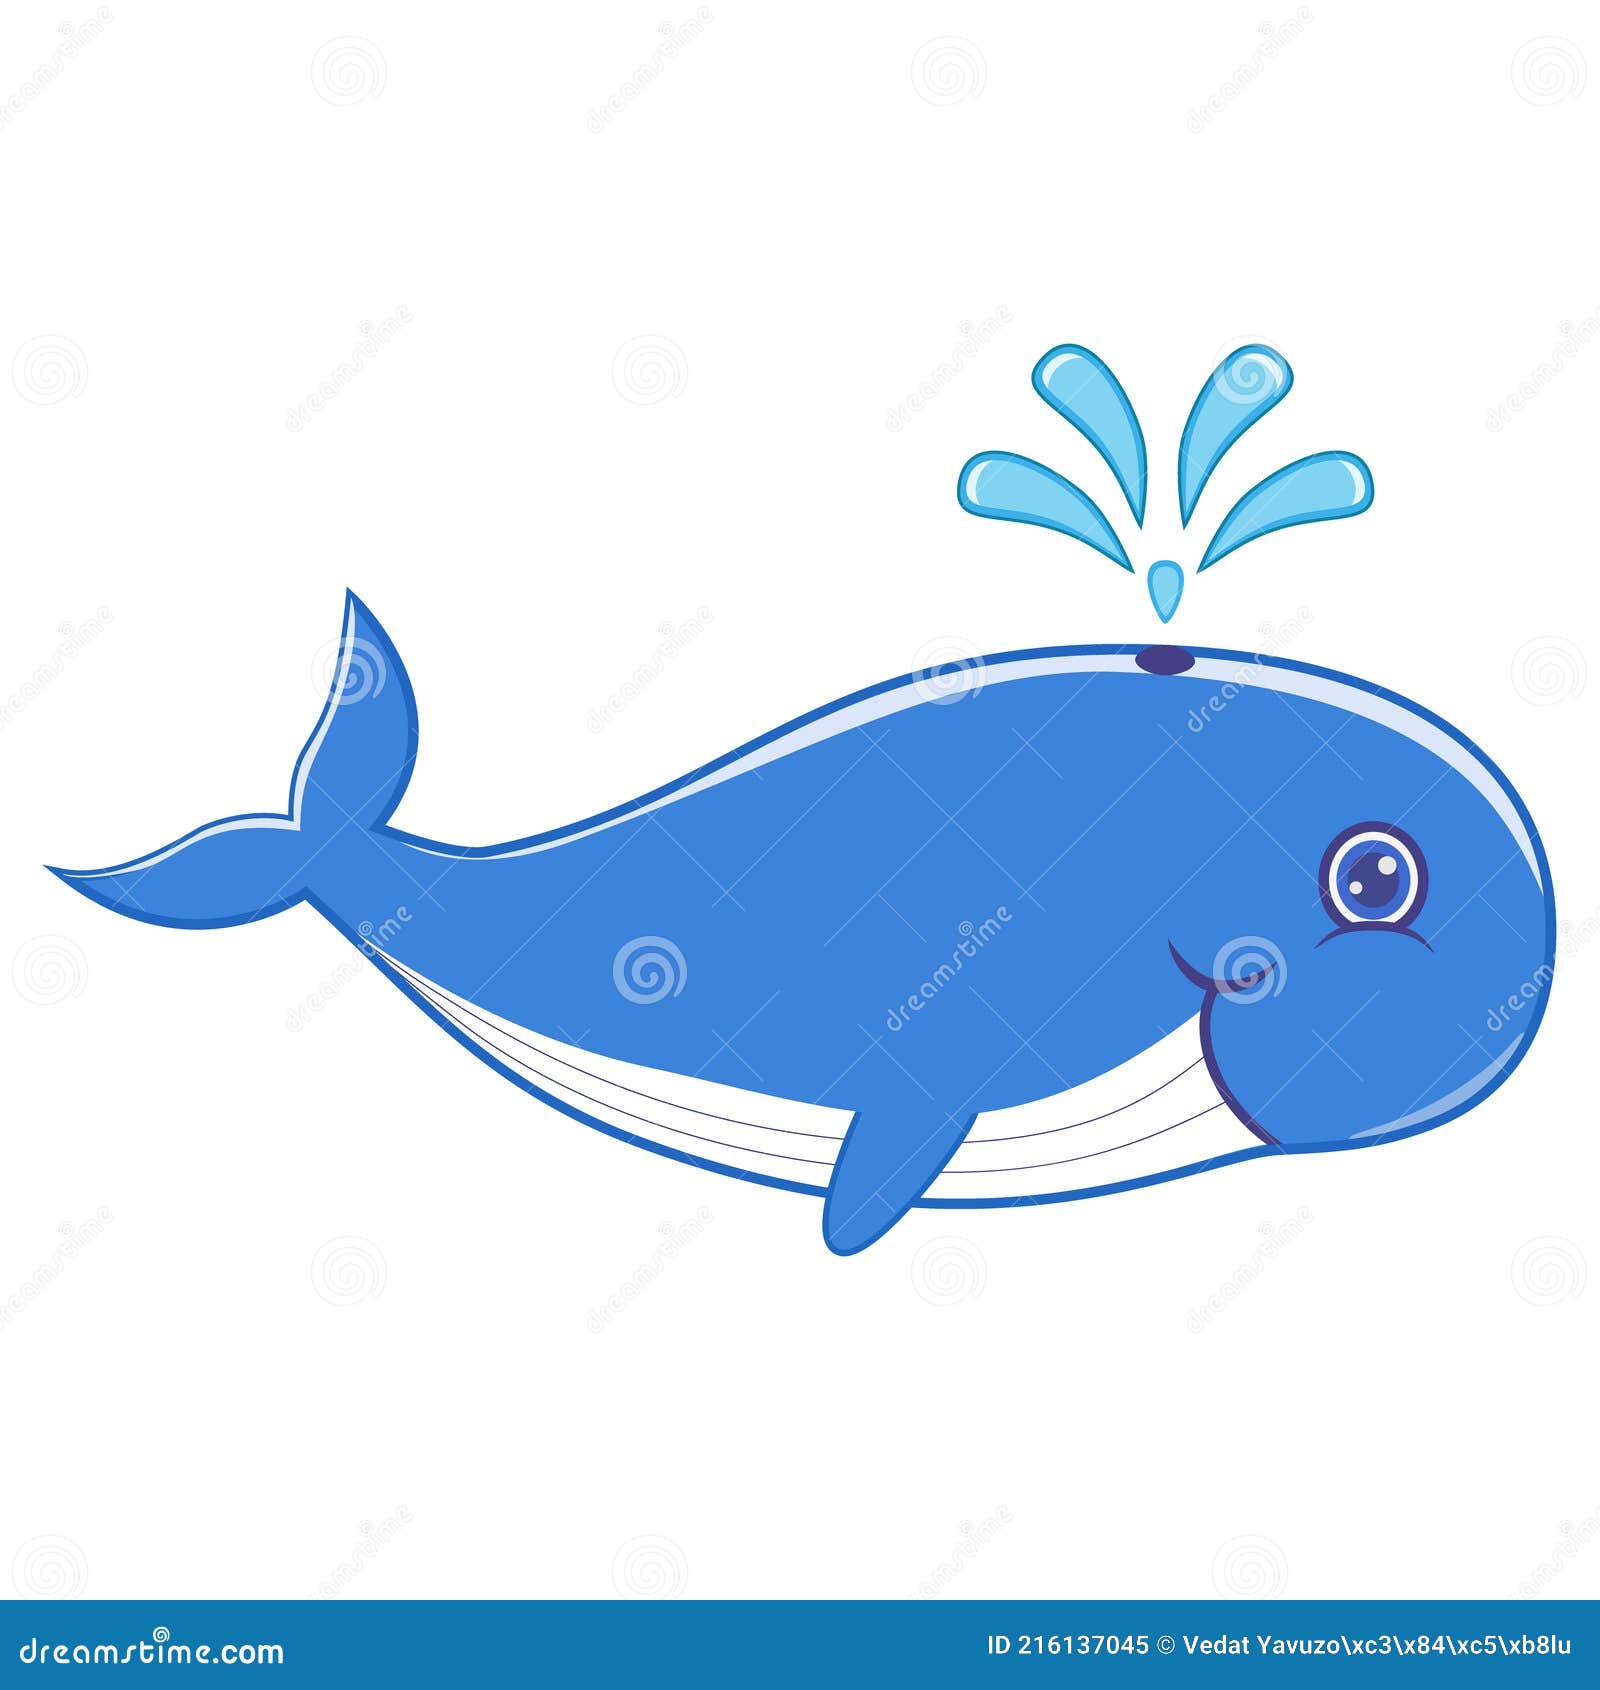 Cute Cartoon Whale Vector on Isolated White Background. Hand Drawing  Smiling and Water Squirting Little Whale. Stock Vector - Illustration of  happiness, mascot: 216137045